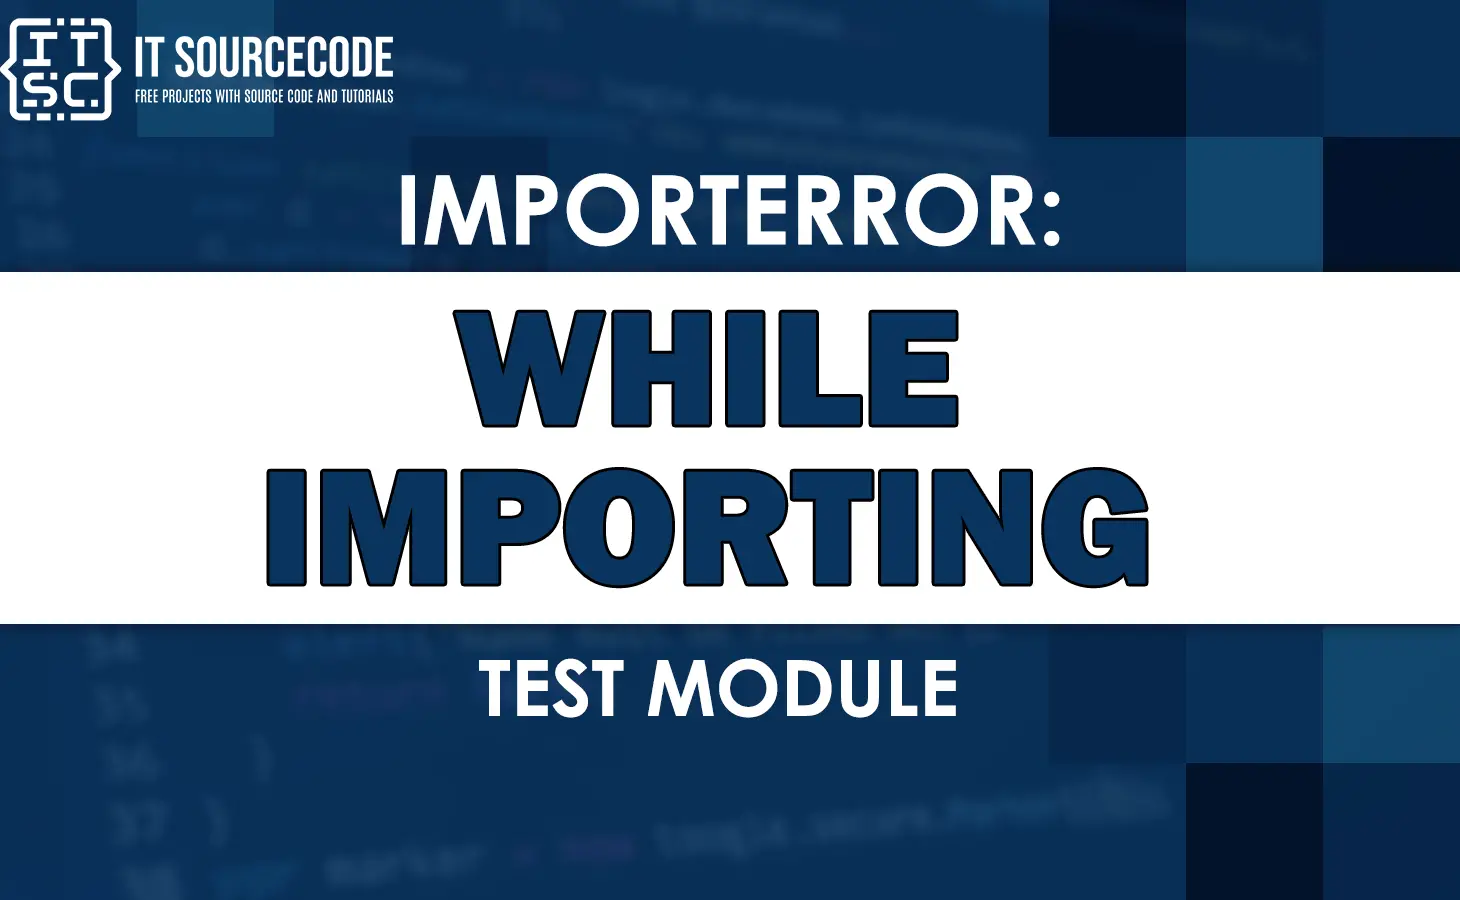 Importerror while importing test module